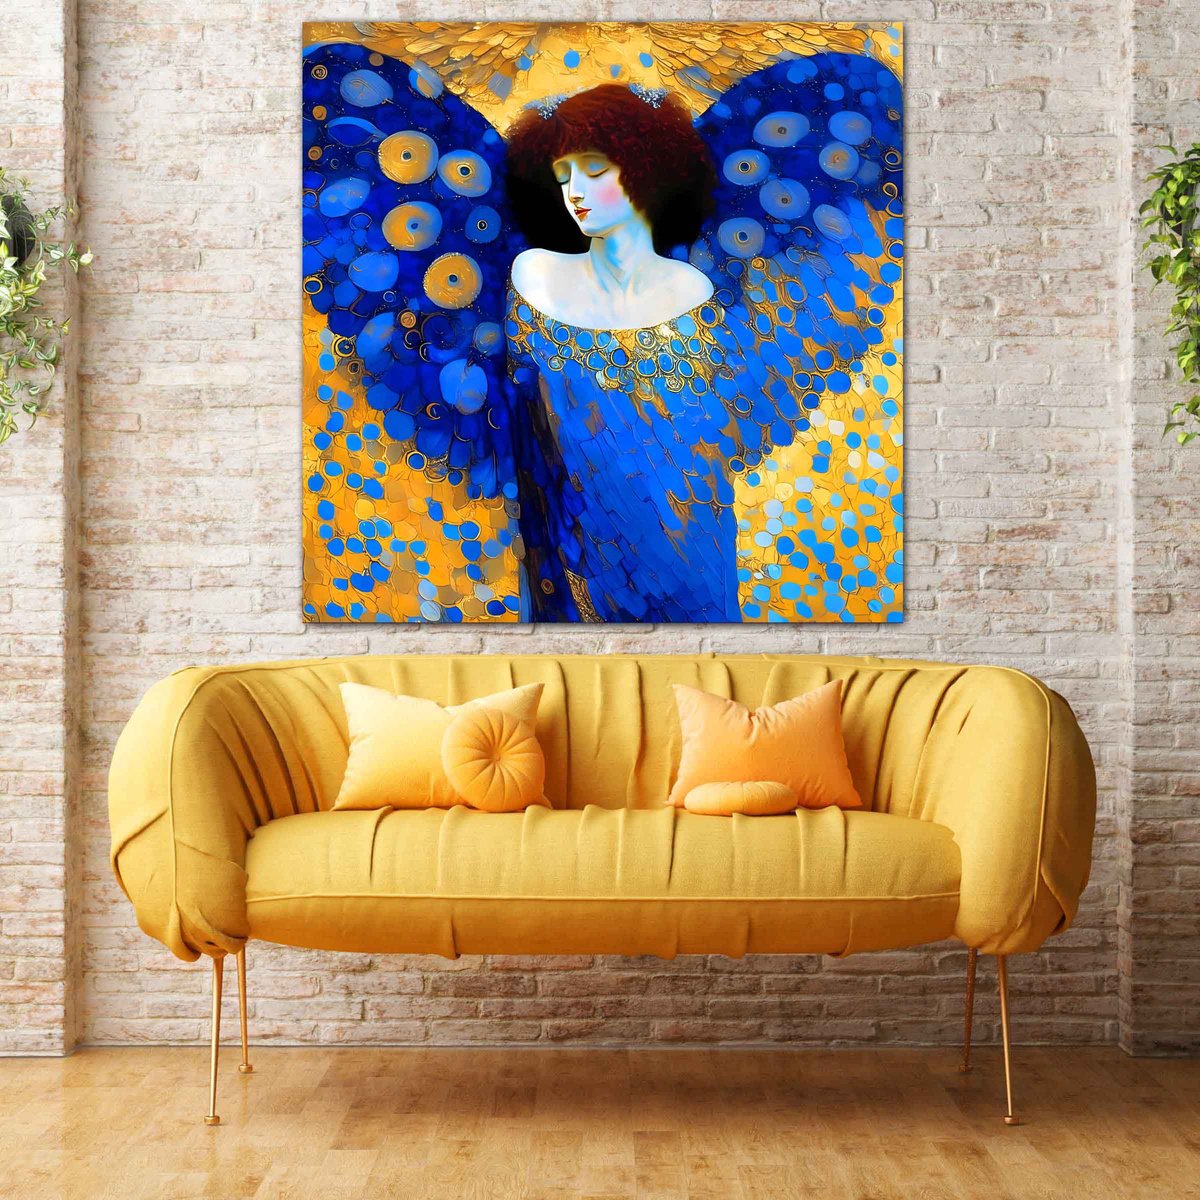 Dreaming Angel - Large format 100 x 100 cm Original oil acrylic computer graphics painting... by BAST